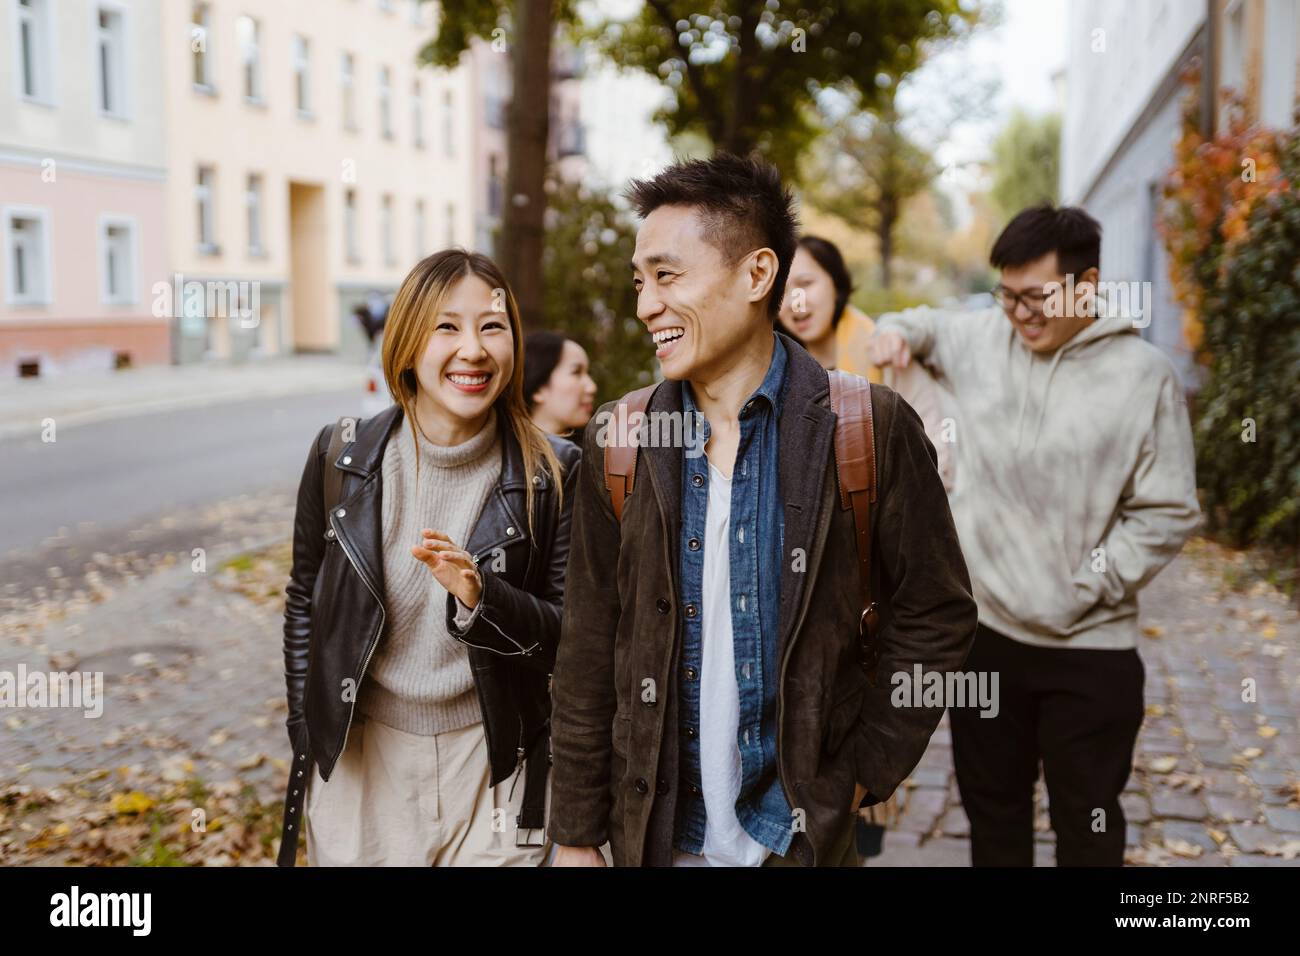 Male and female friends laughing while walking on sidewalk Stock Photo